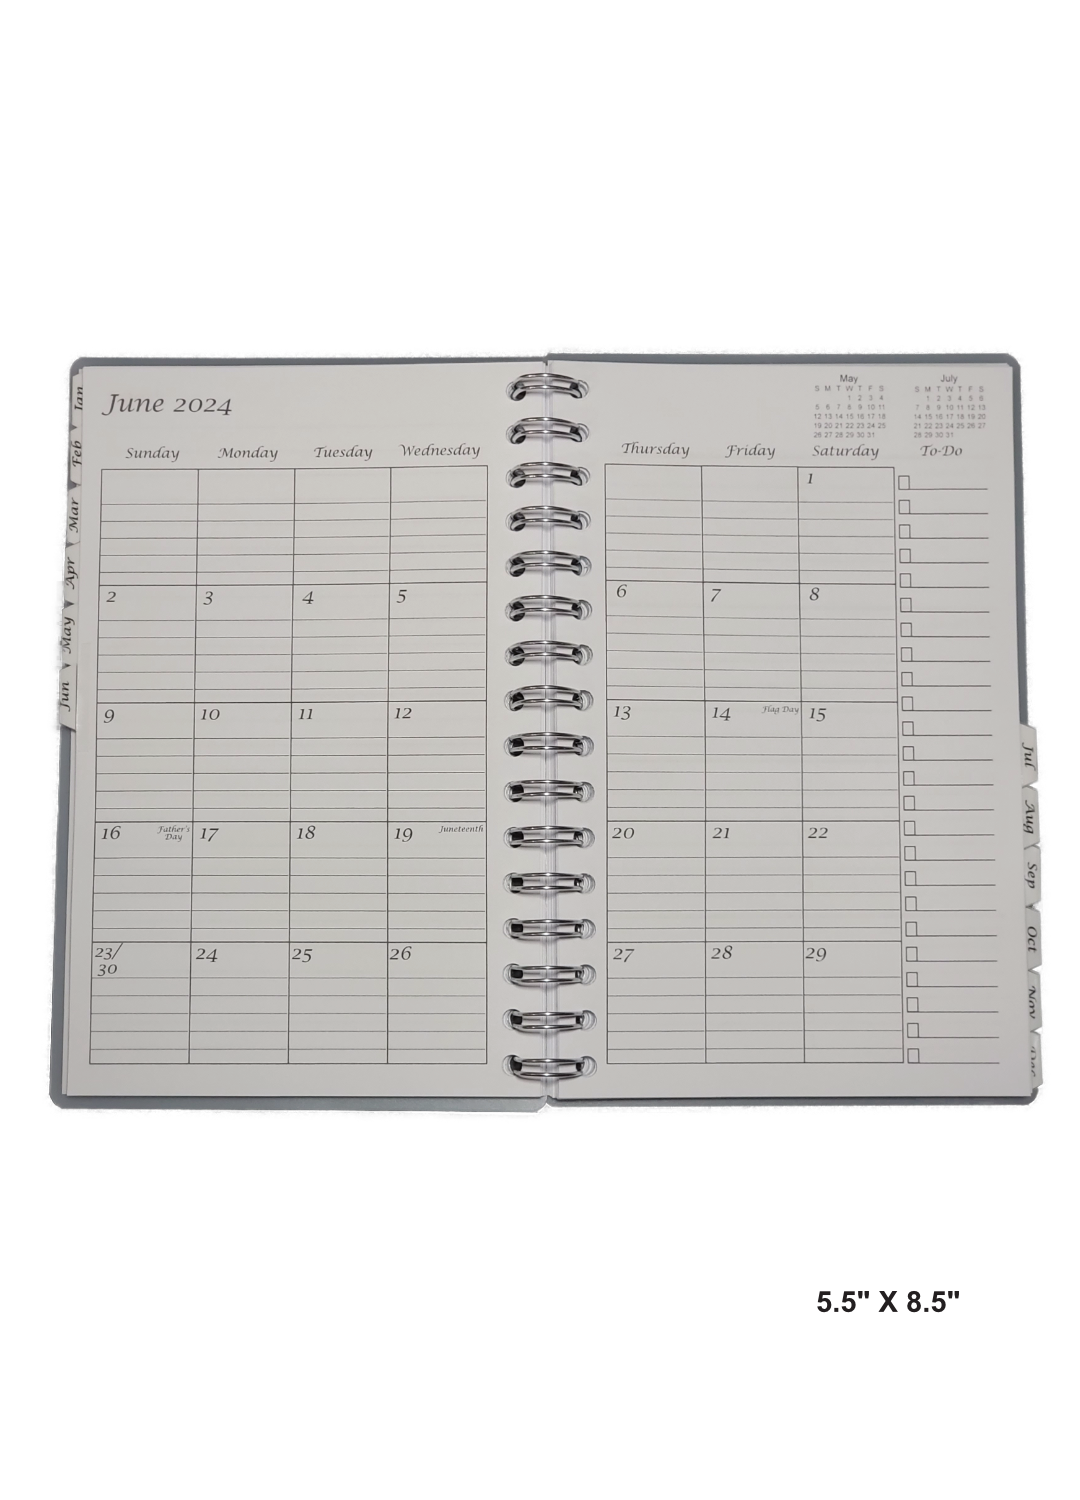 Inside view of a 5.5" x 8.5" hand-made 12-month planner with a clean and organized layout. Each month has dedicated pages with ample writing space and clear headings. A practical and visually appealing tool for staying organized.